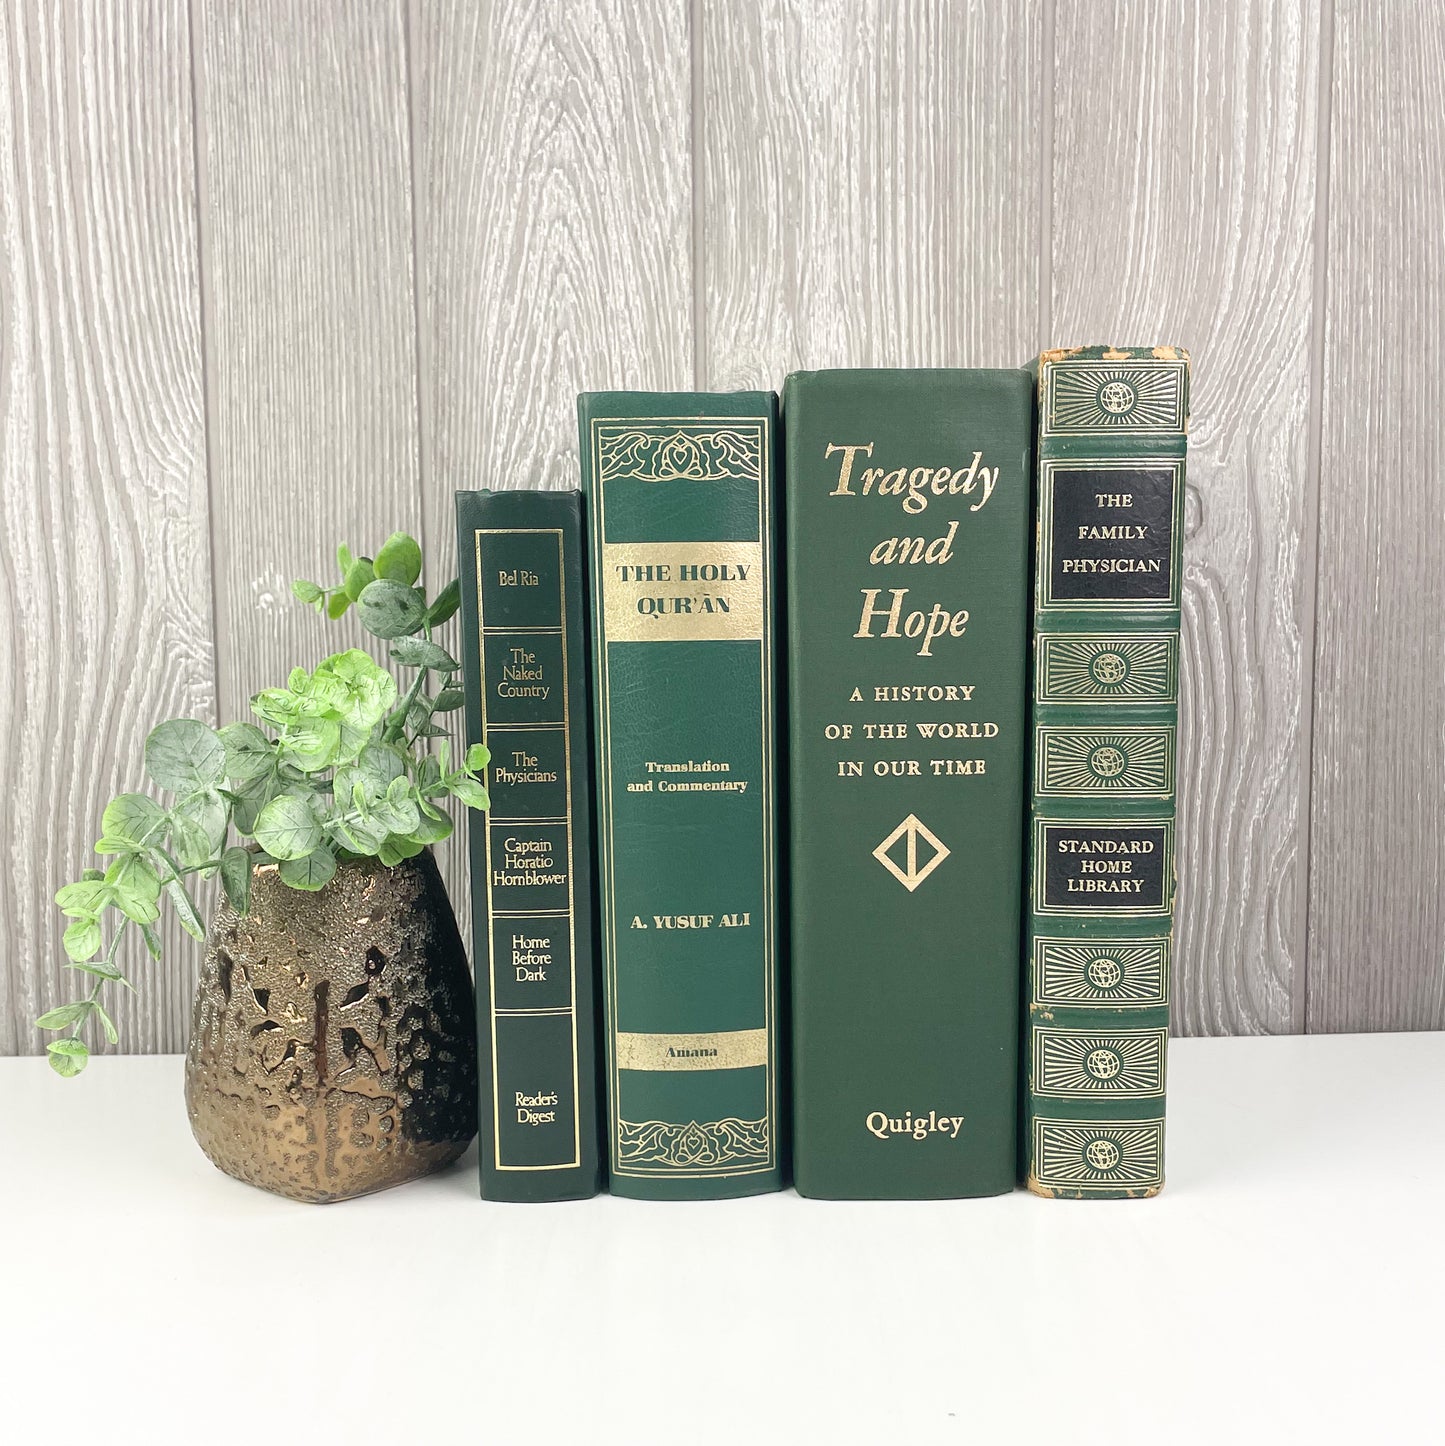 Green and Gold Decorative Books